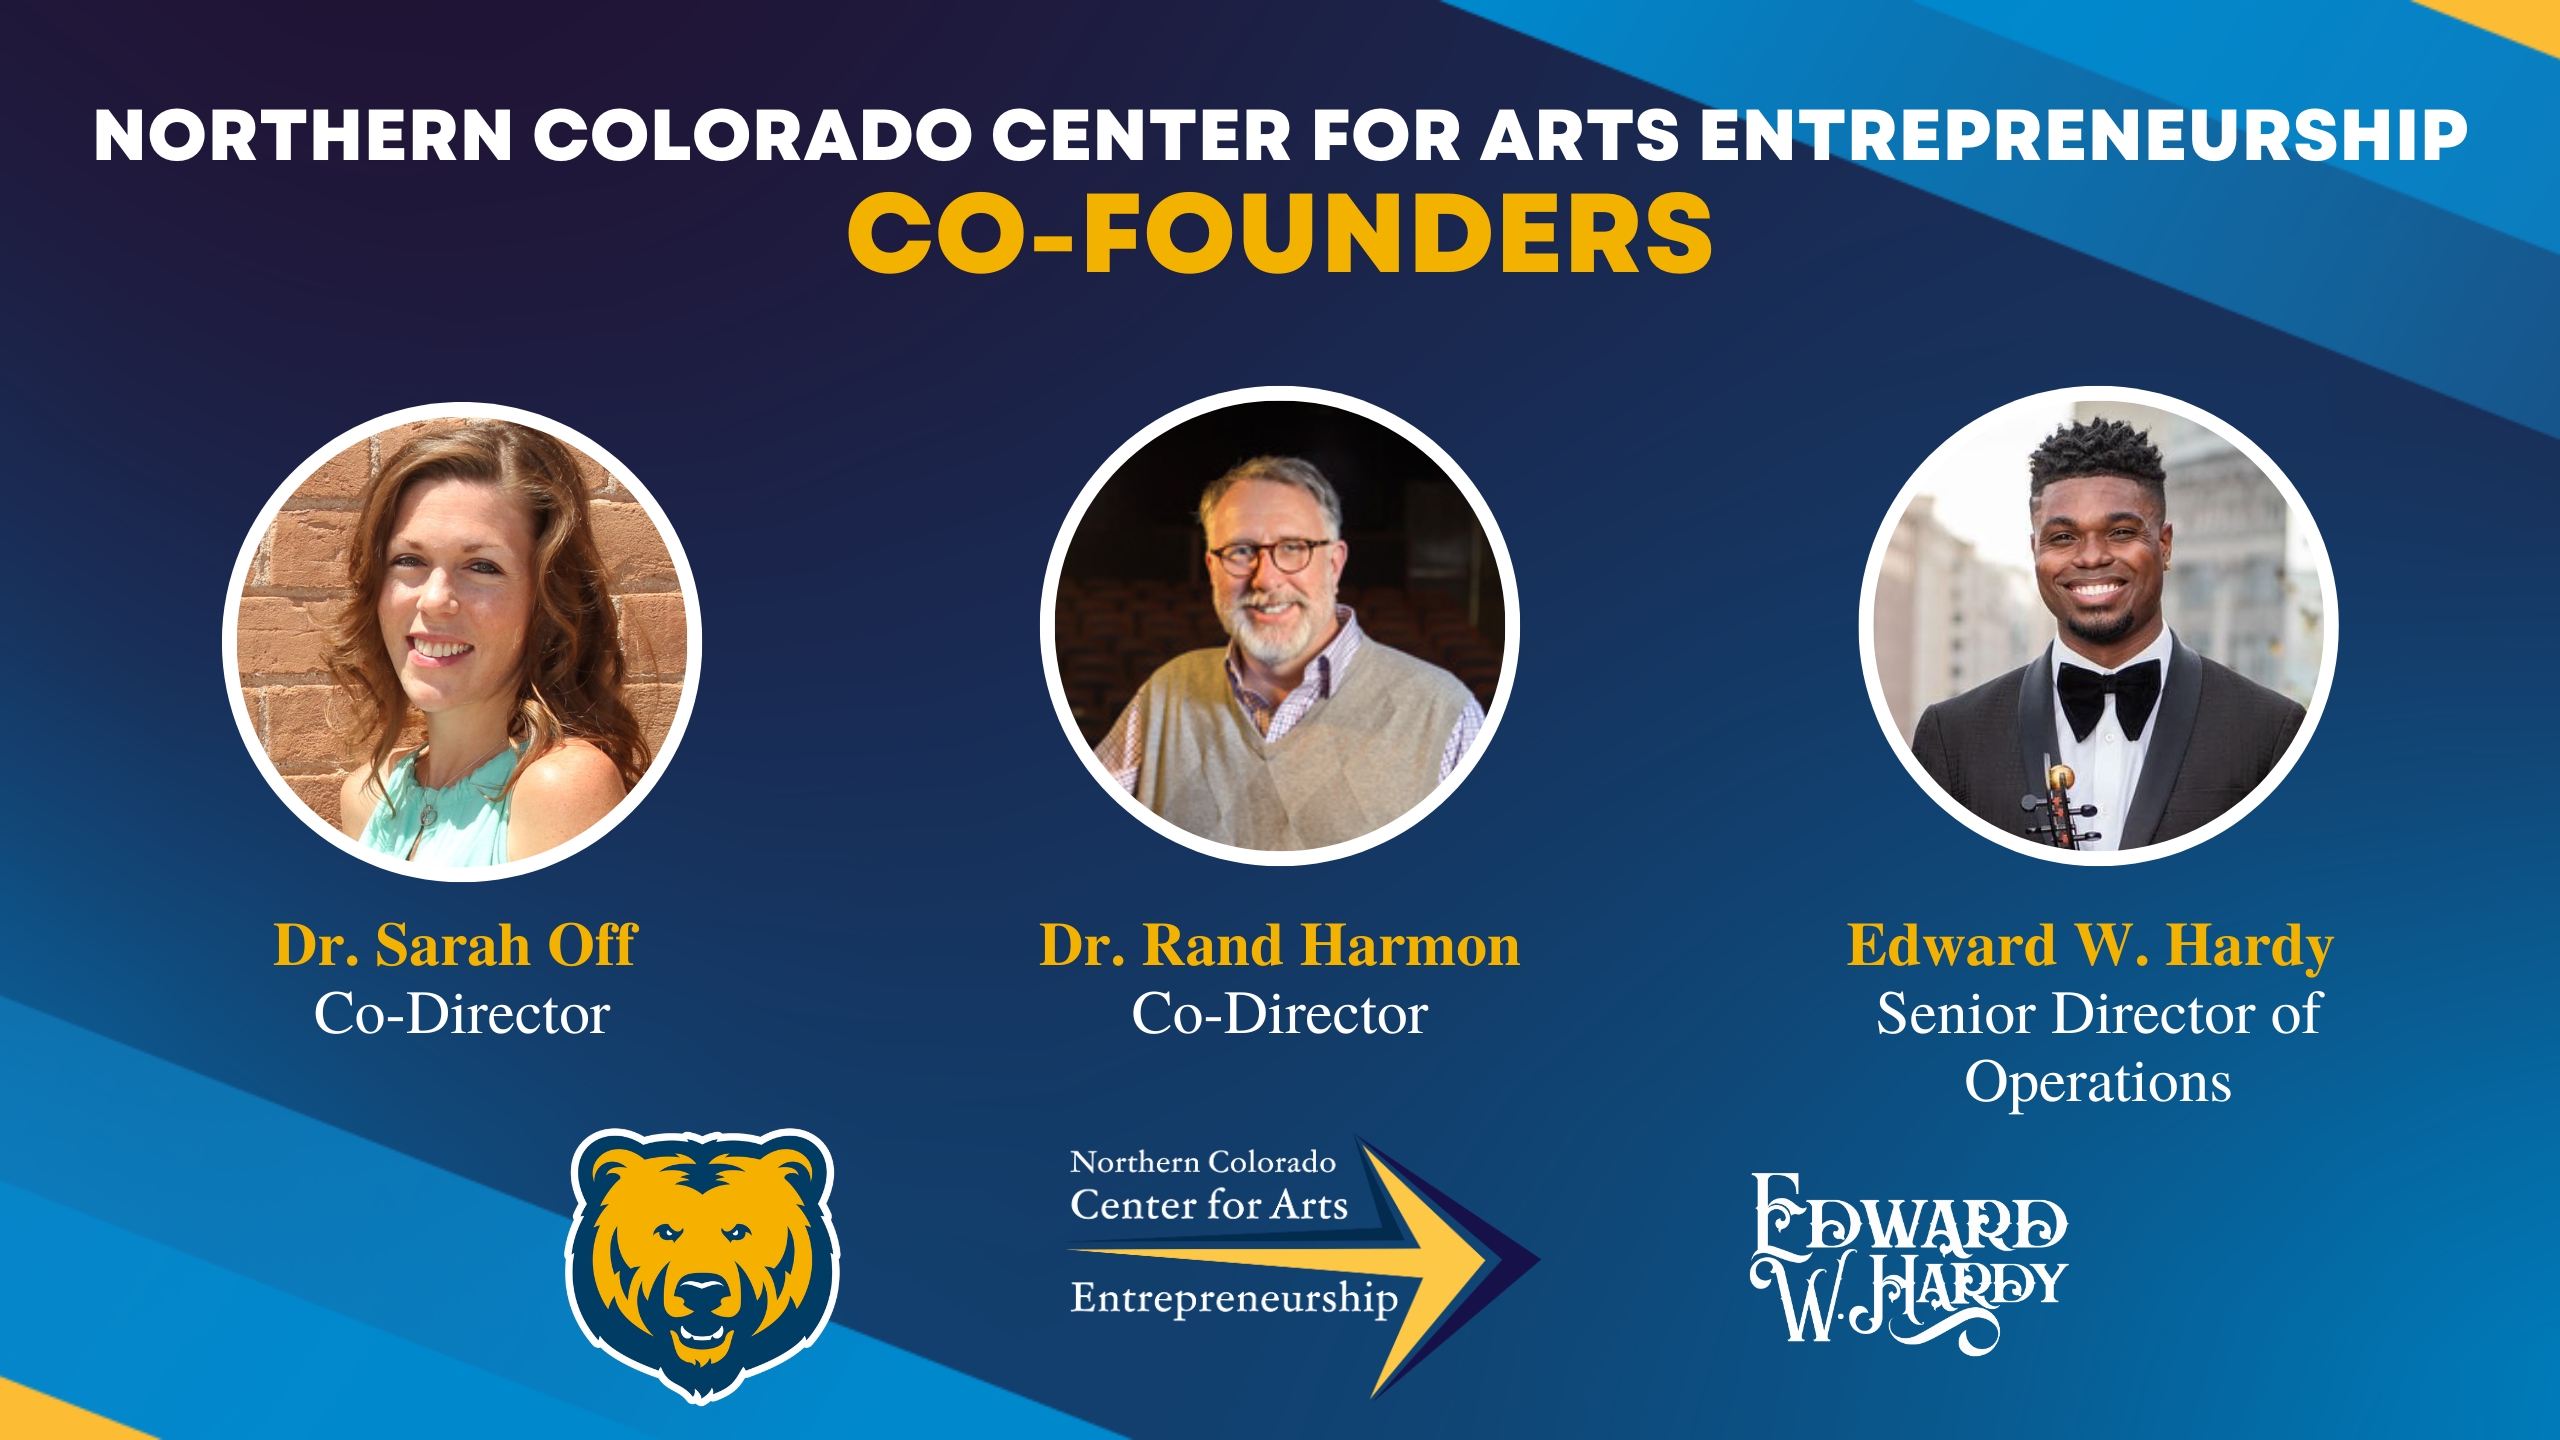 Co-Founders Edward W. Hardy and Drs. Sarah Off & Rand Harmon of the Northern Colorado Center for Arts Entrepreneurship (University of Northern Colorado: College of Performing and Visual Arts).